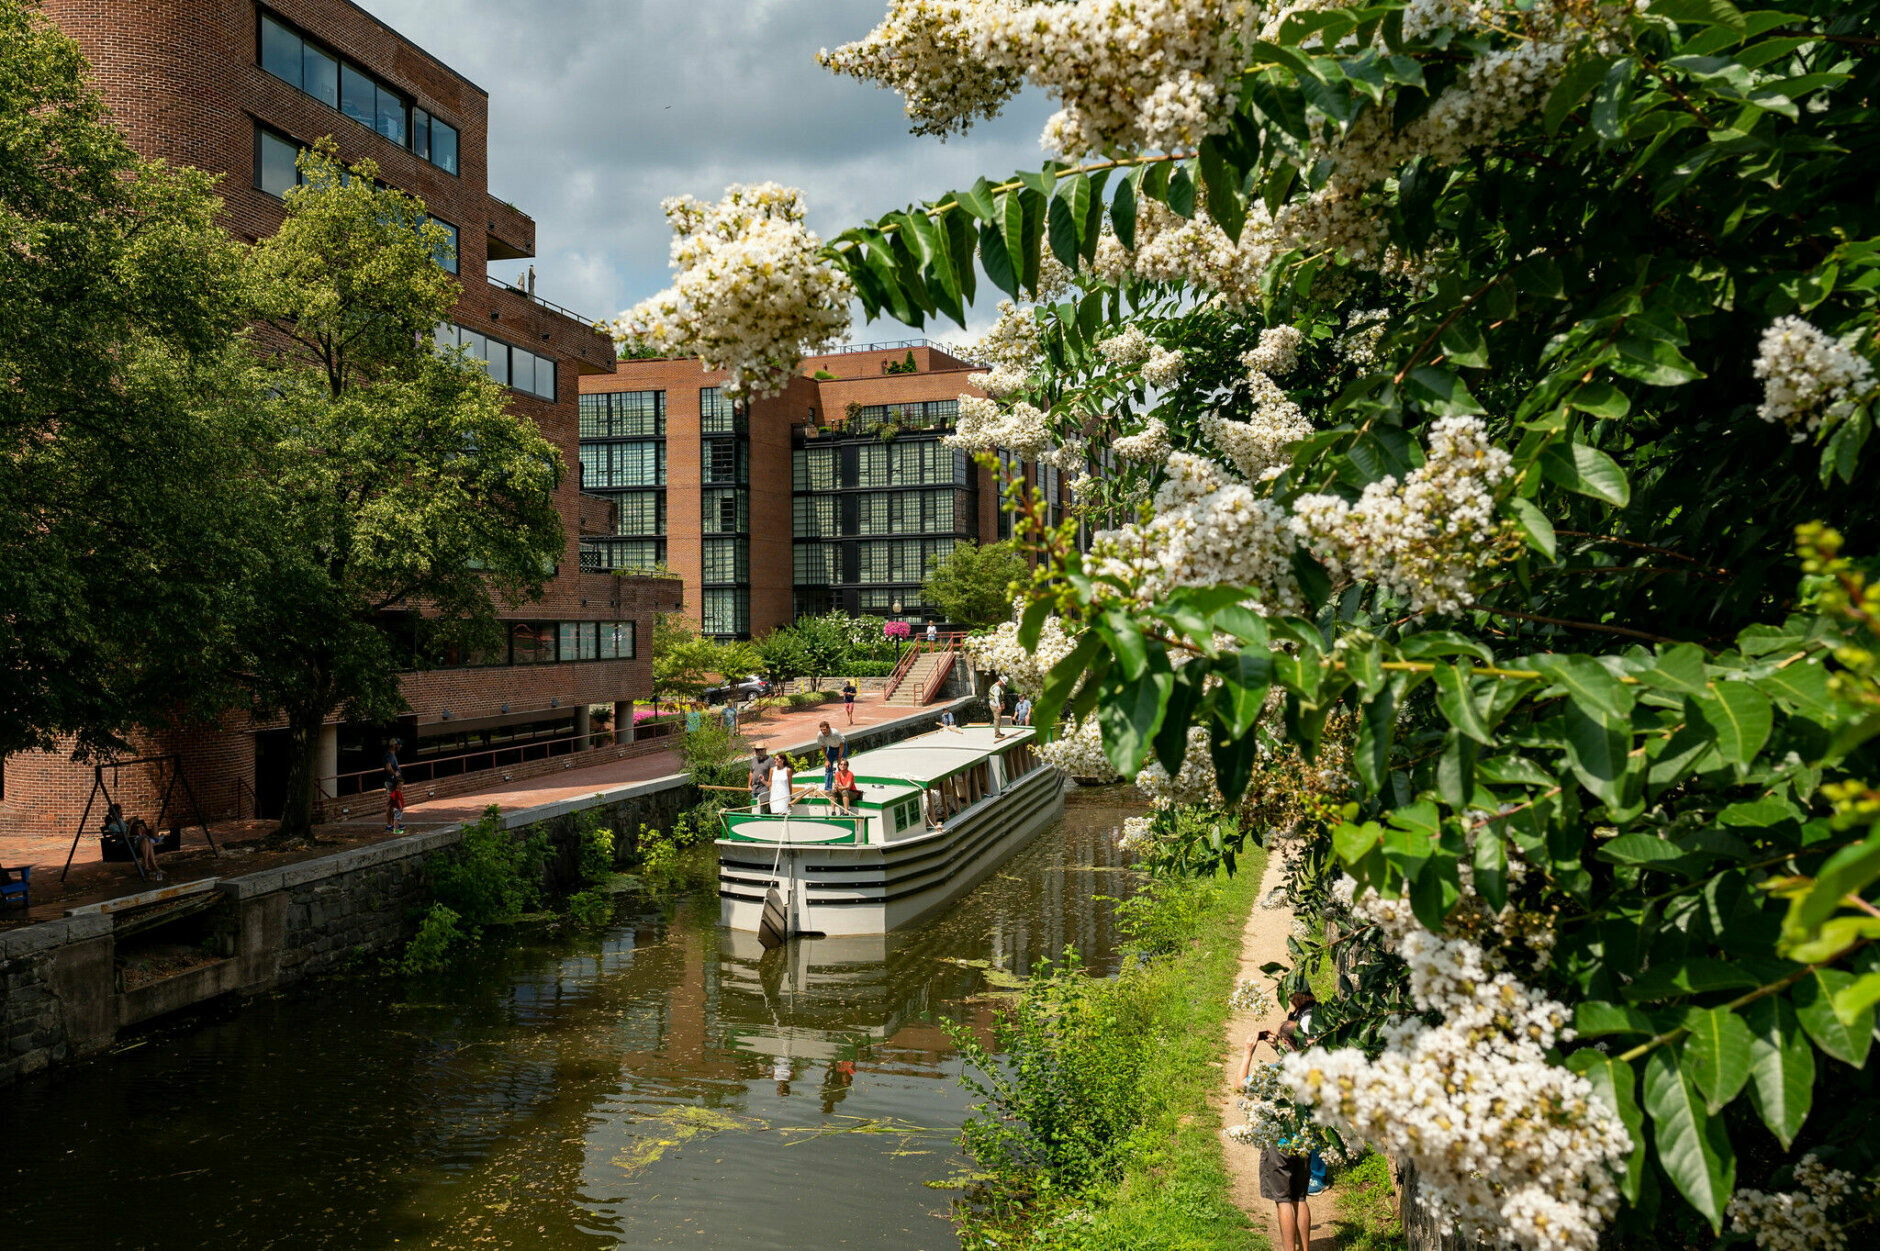 <p>Starting in the spring of 2022, the public will be able to step back in time by stepping onboard The Heritage and feel what it would have been like to travel in that era. The Heritage will hold more than 60 passengers and take them on a mule-pulled ride through the locks of the restored section of the canal.</p>
